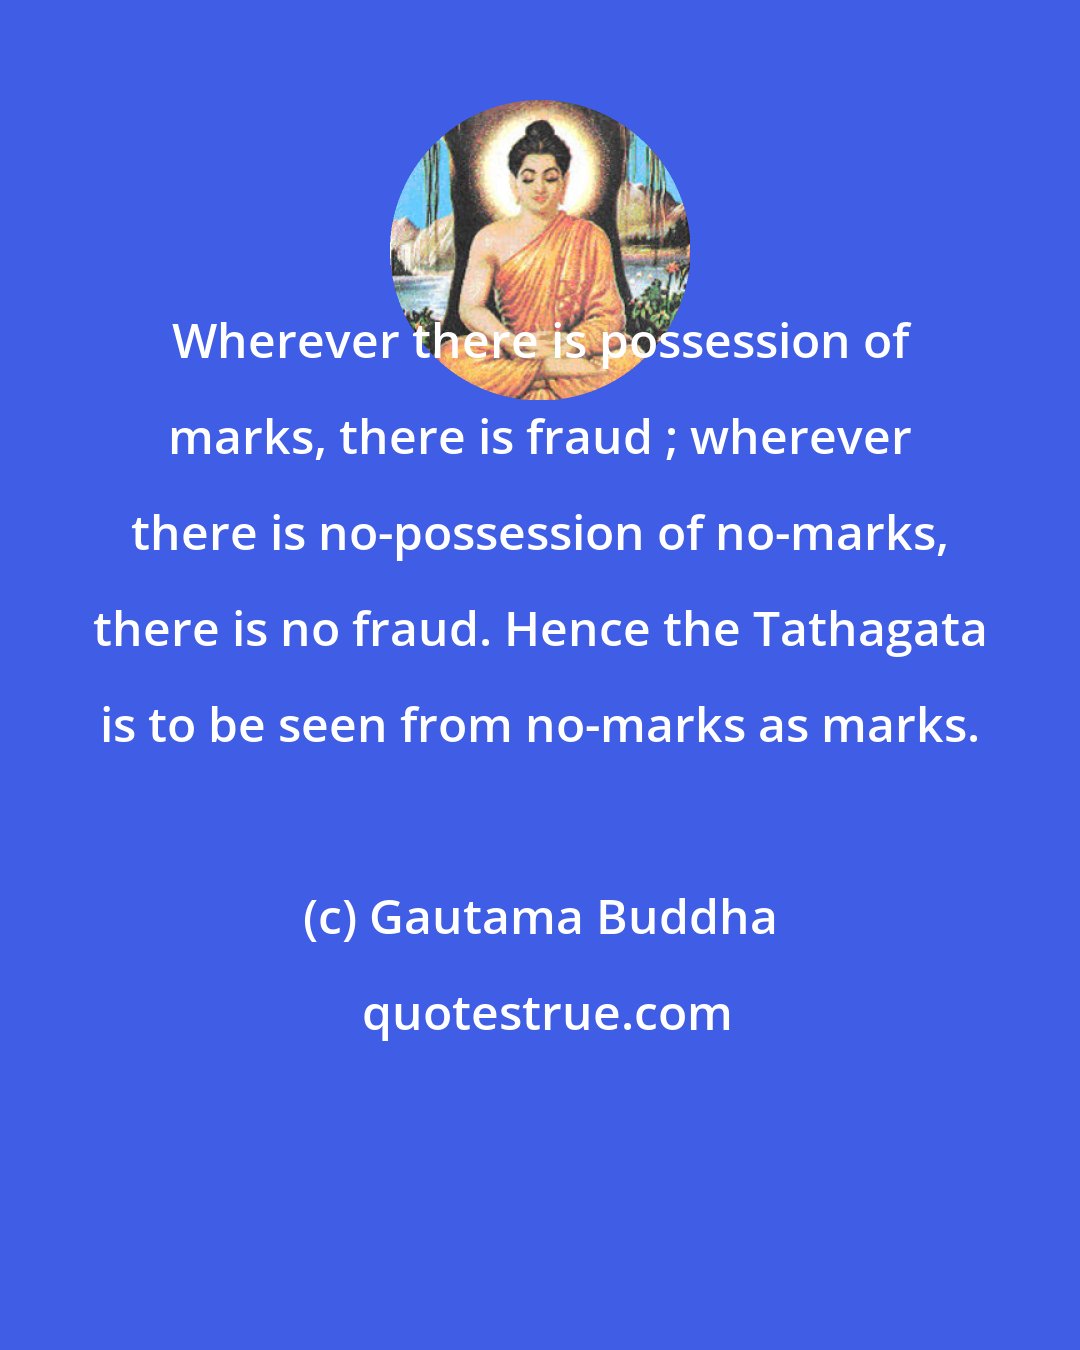 Gautama Buddha: Wherever there is possession of marks, there is fraud ; wherever there is no-possession of no-marks, there is no fraud. Hence the Tathagata is to be seen from no-marks as marks.